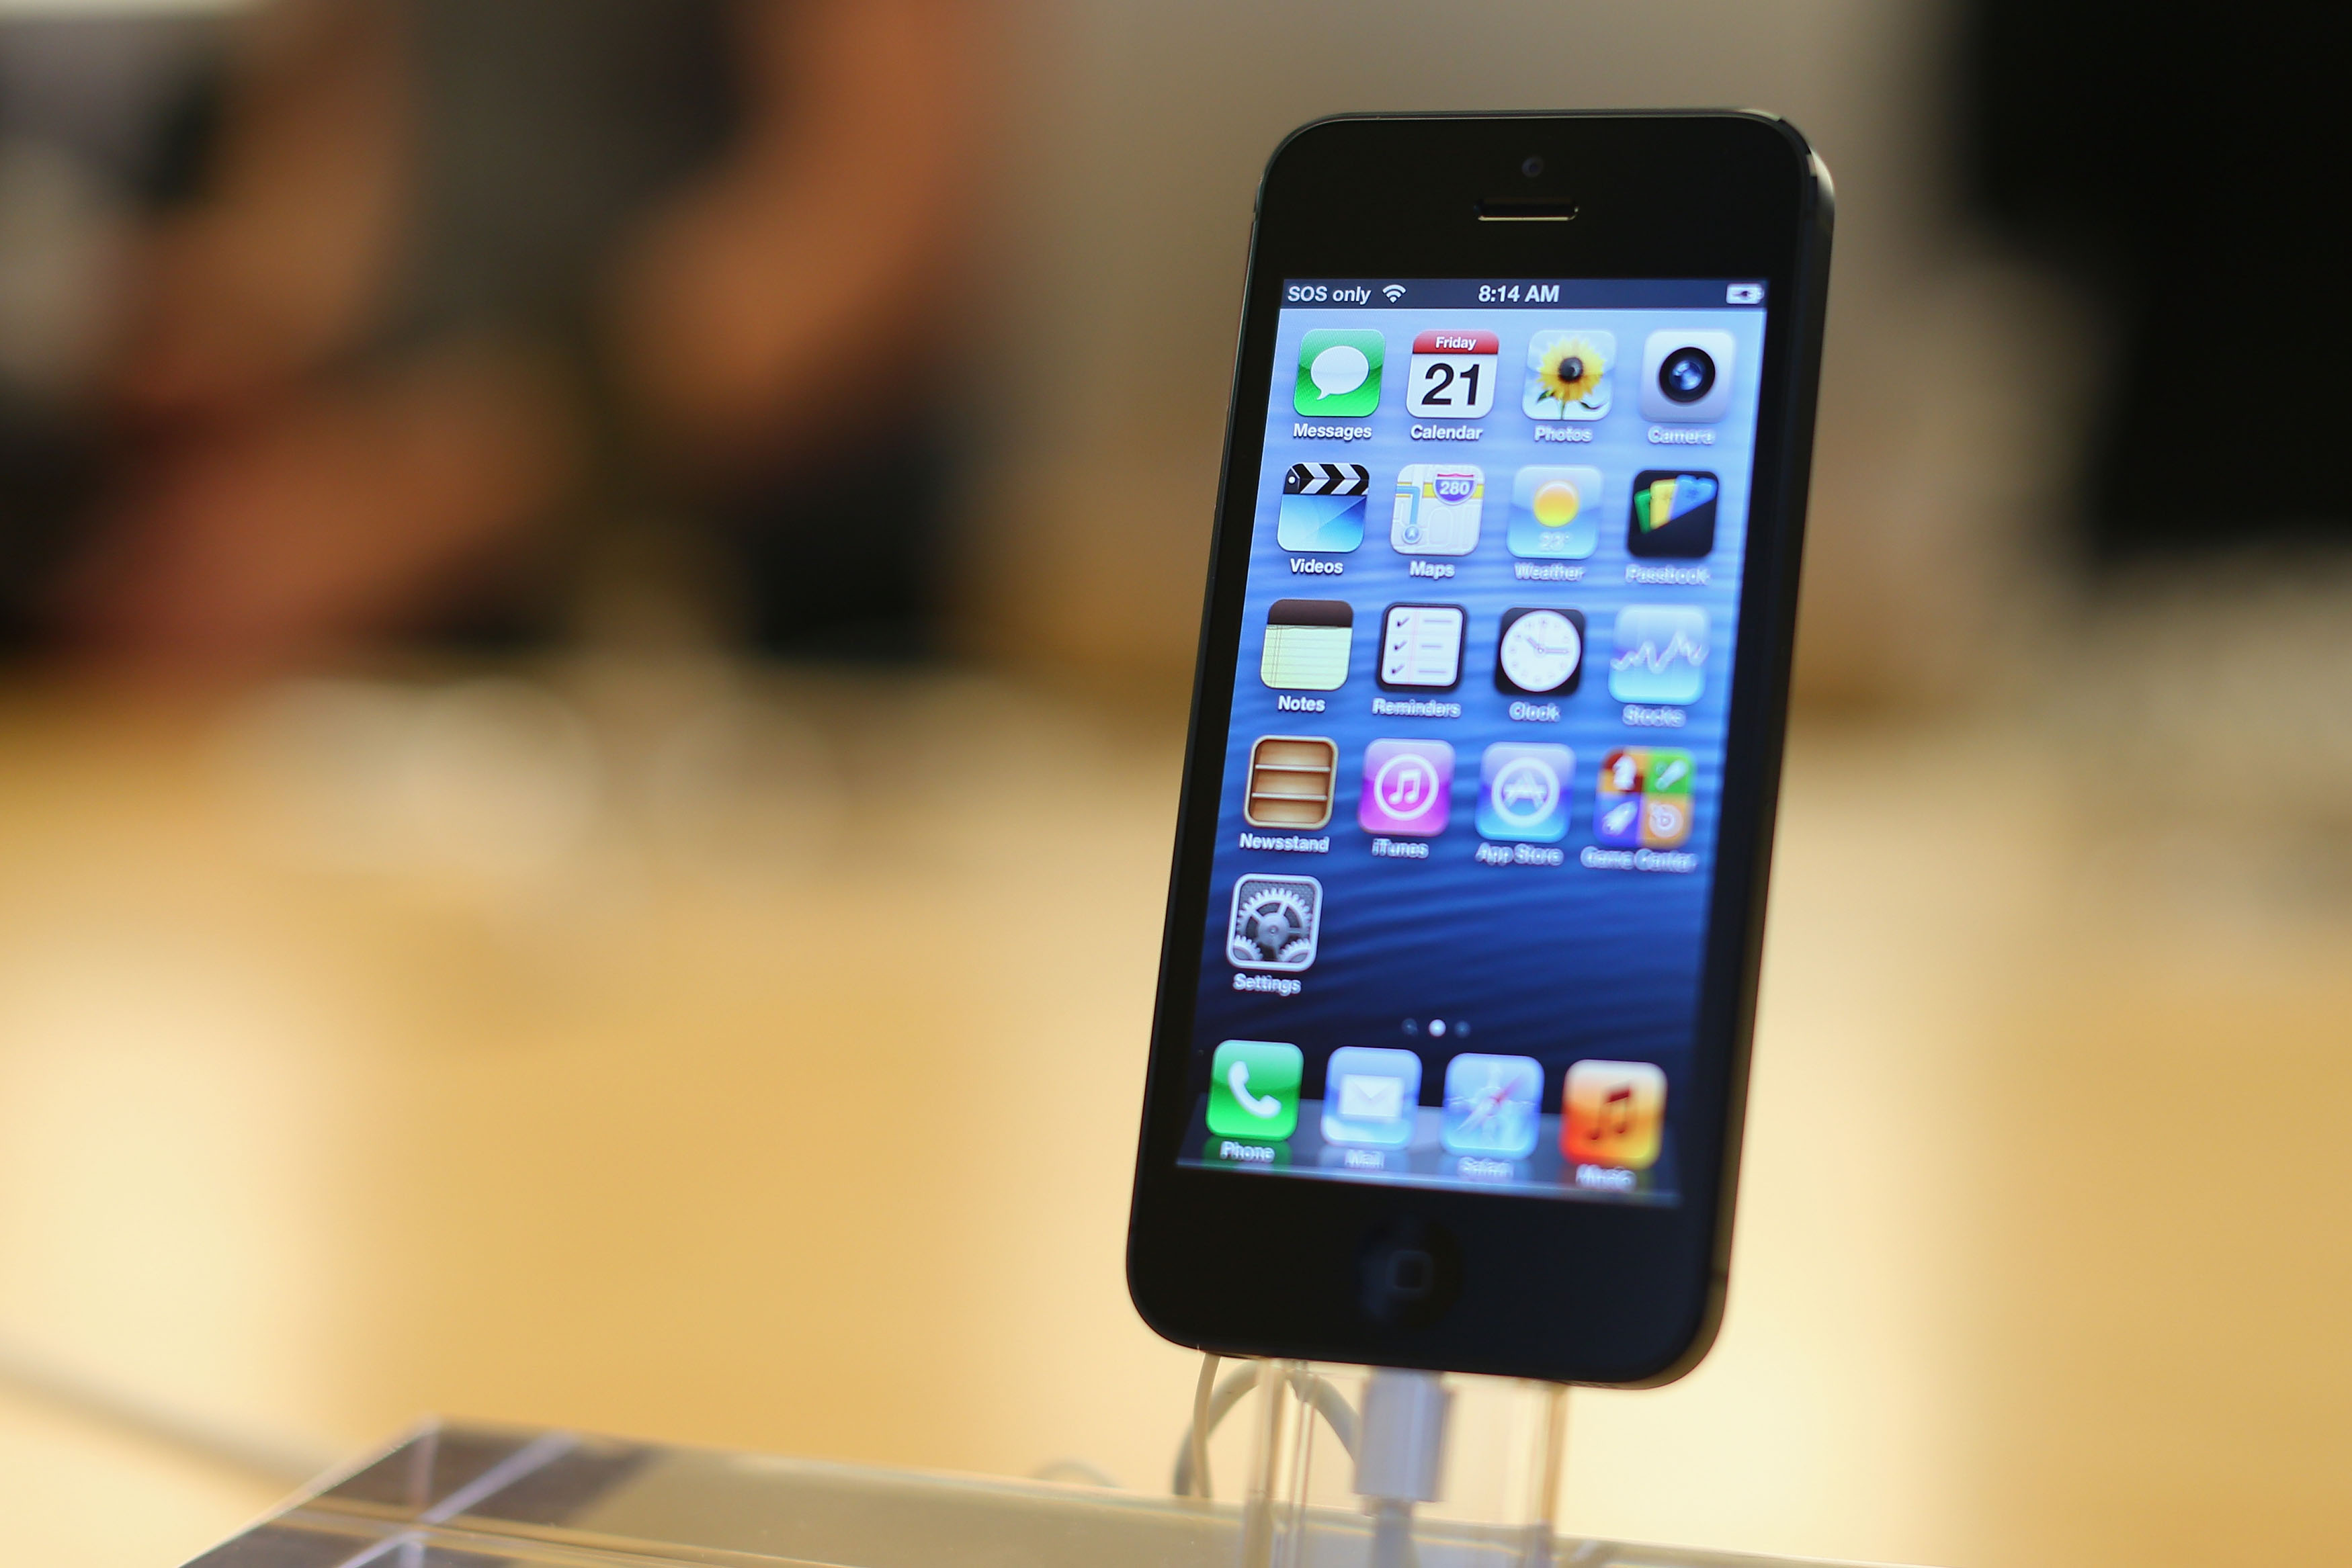 The iPhone 5 smartphone is displayed at the Apple flagship store on George street on September 21, 2012 in Sydney, Australia. (Cameron Spencer—Getty Images)